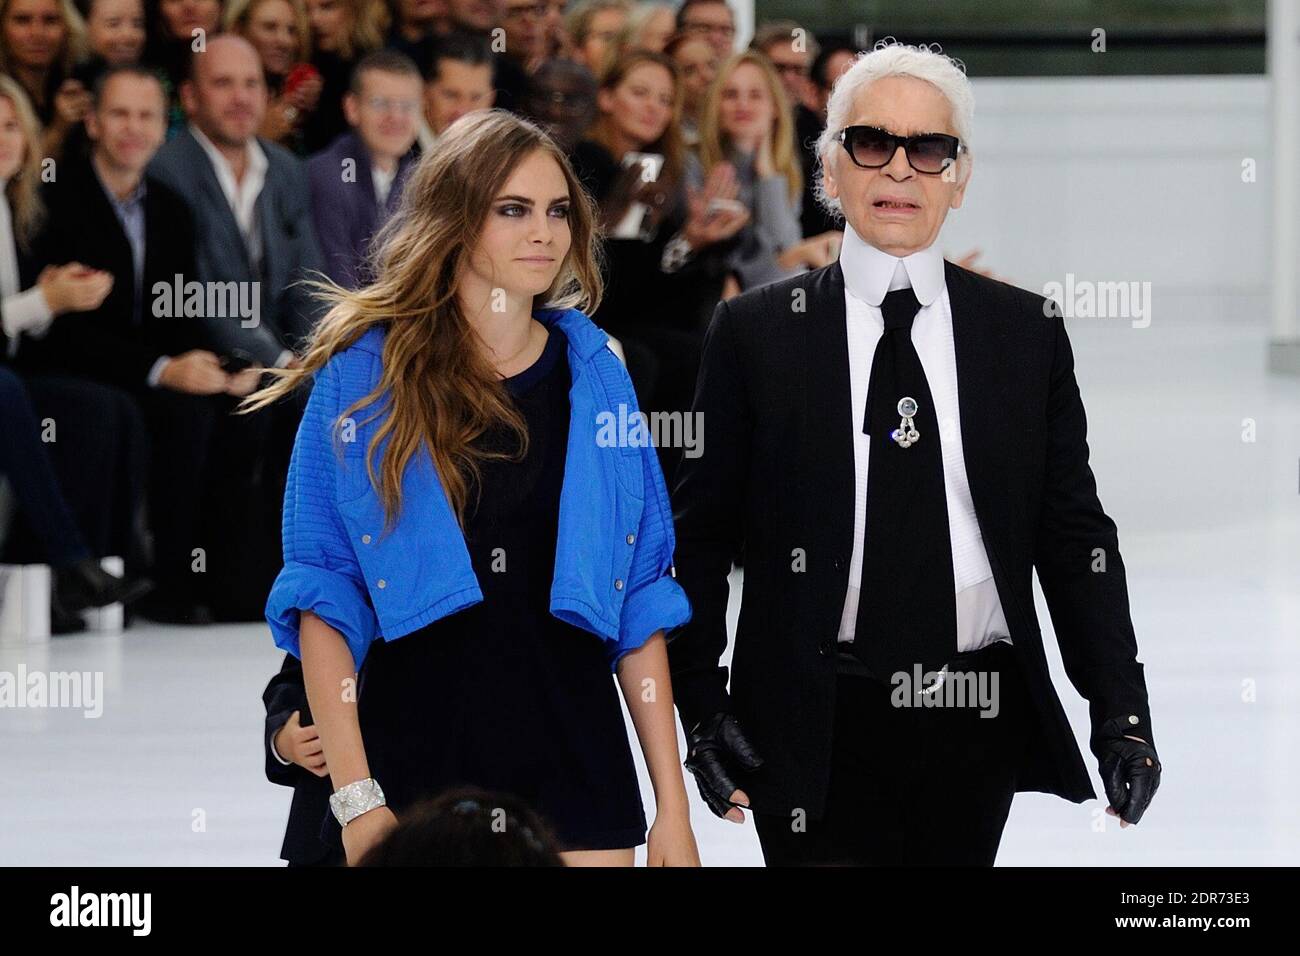 Cara Delevingne Returns to Modeling with Chanel Sunglass Campaign